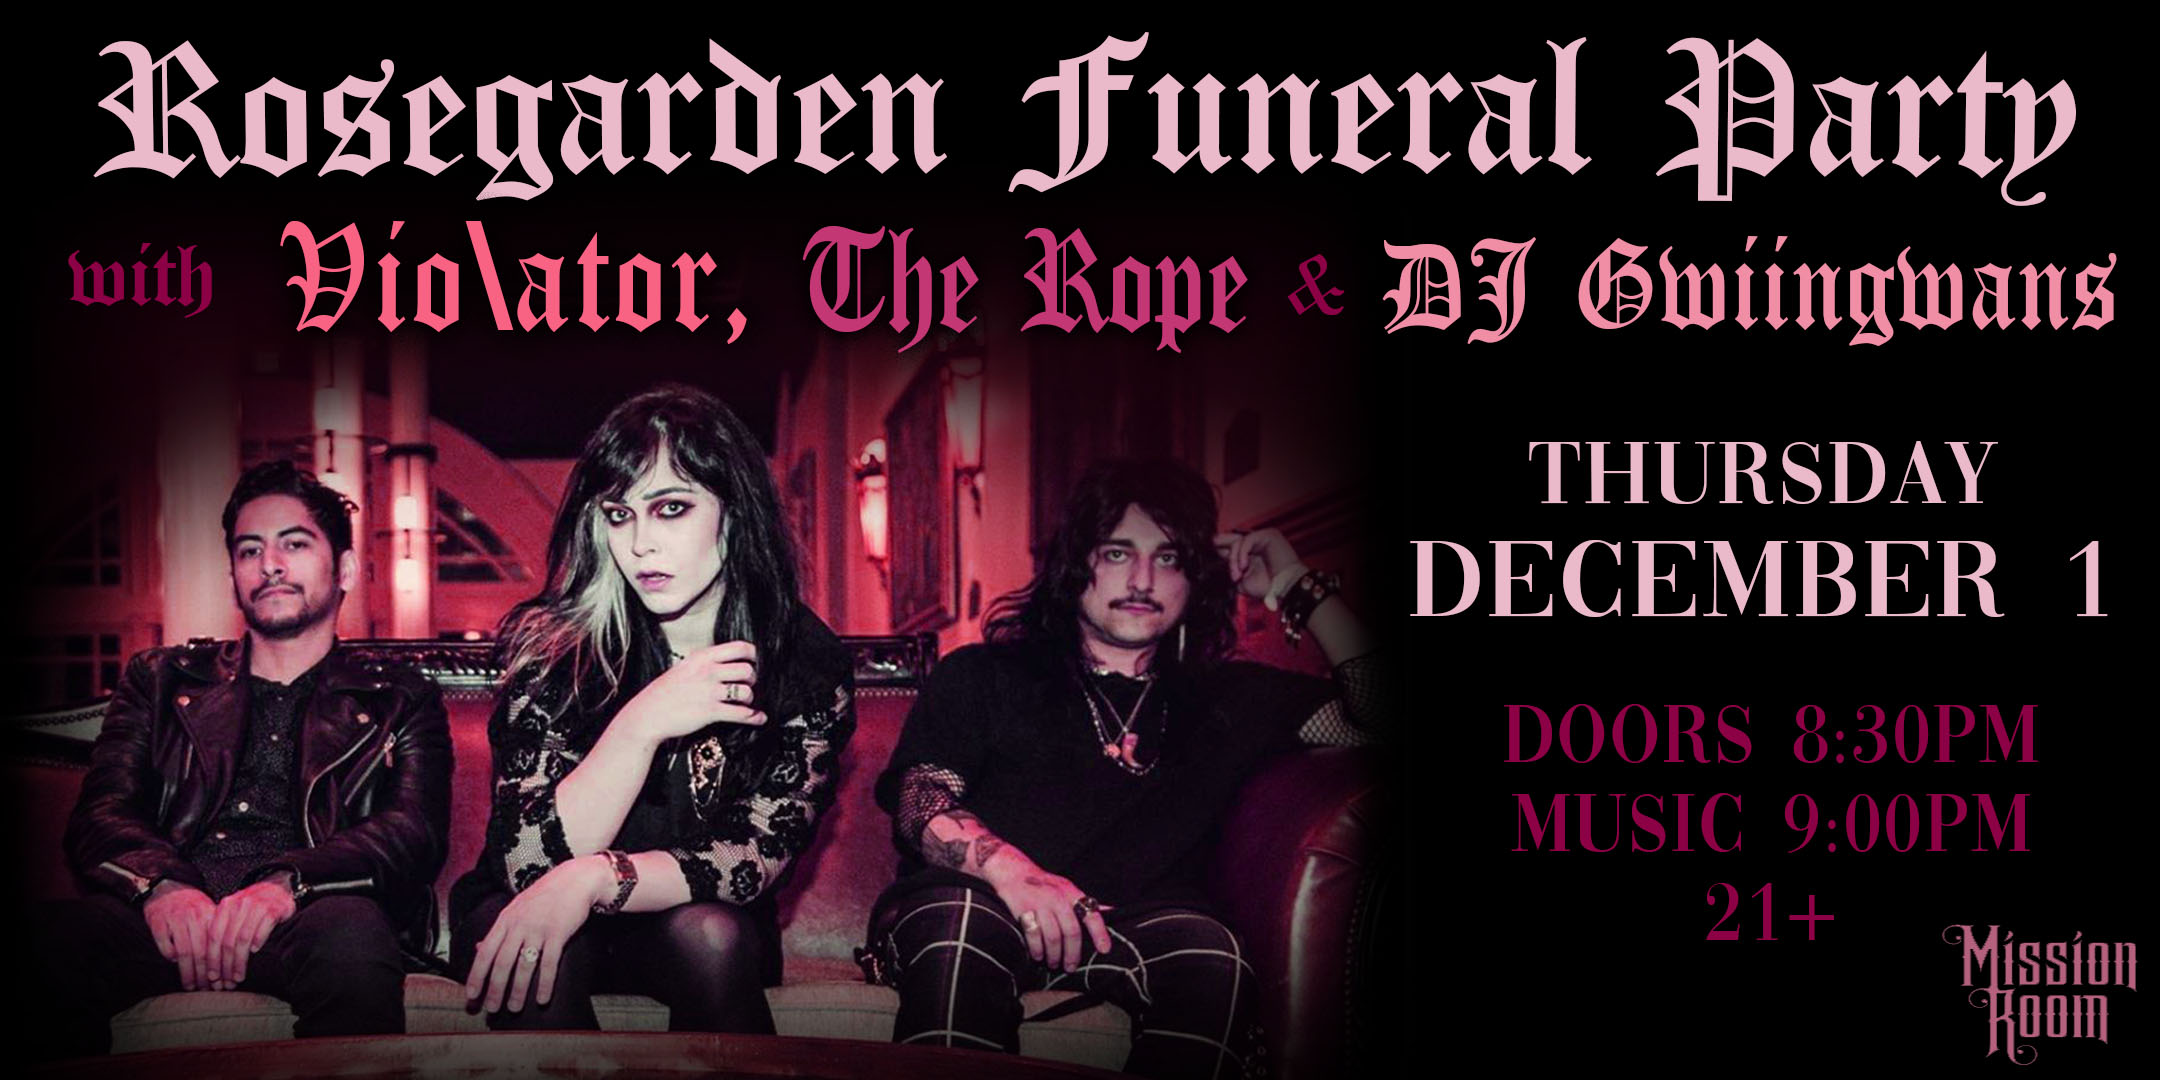 Rosegarden Funeral Party Vio\ator The Rope DJ Gwiingwans Thursday December 1 The Mission Room Doors 8:30pm :: Music 9:00pm :: 21+ General Admission * $13 ADV / $18 DOS